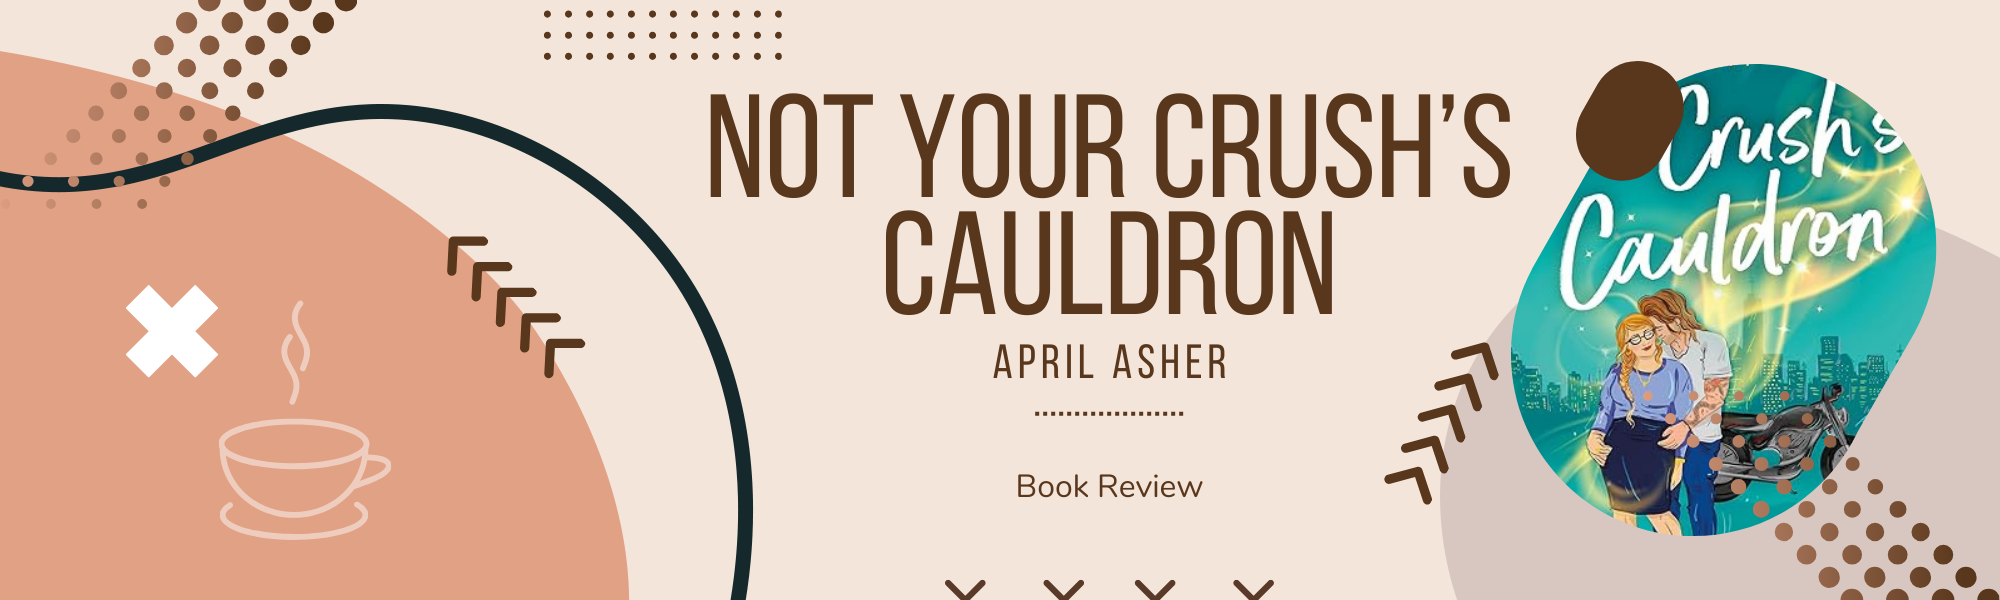 Book Review – ‘Not Your Crush’s Cauldron’ by April Asher